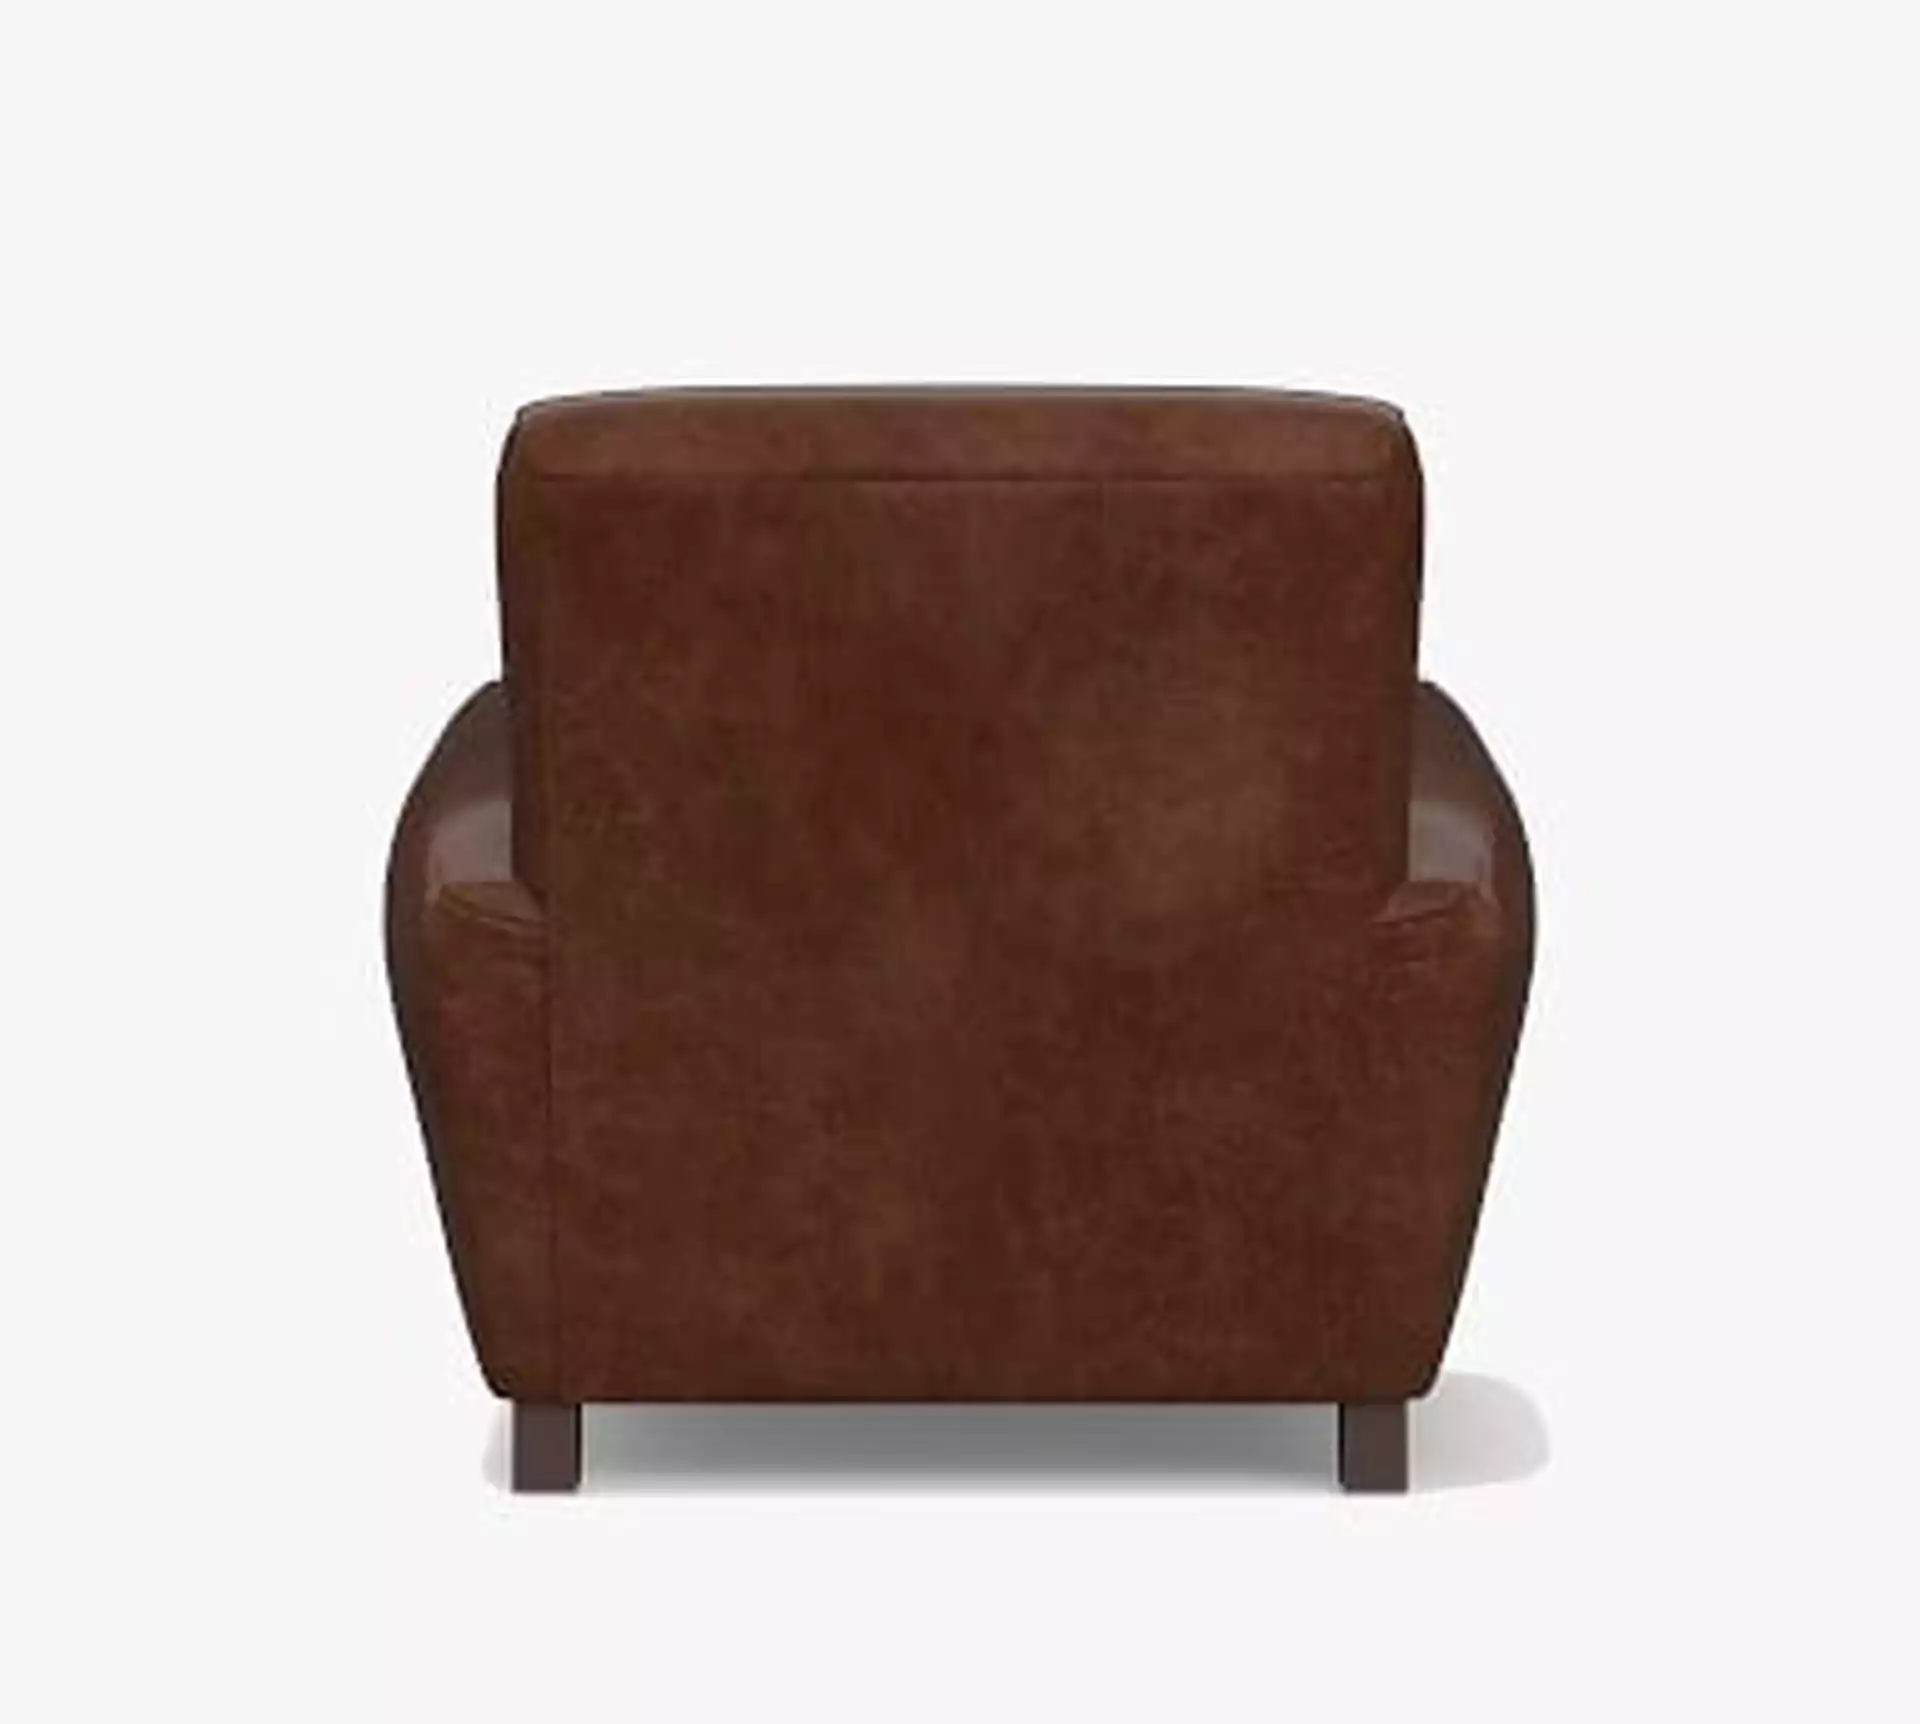 Manhattan Square Arm Leather Power Tech Recliner with Bronze Nailheads, Polyester Wrapped Cushions, Churchfield Camel